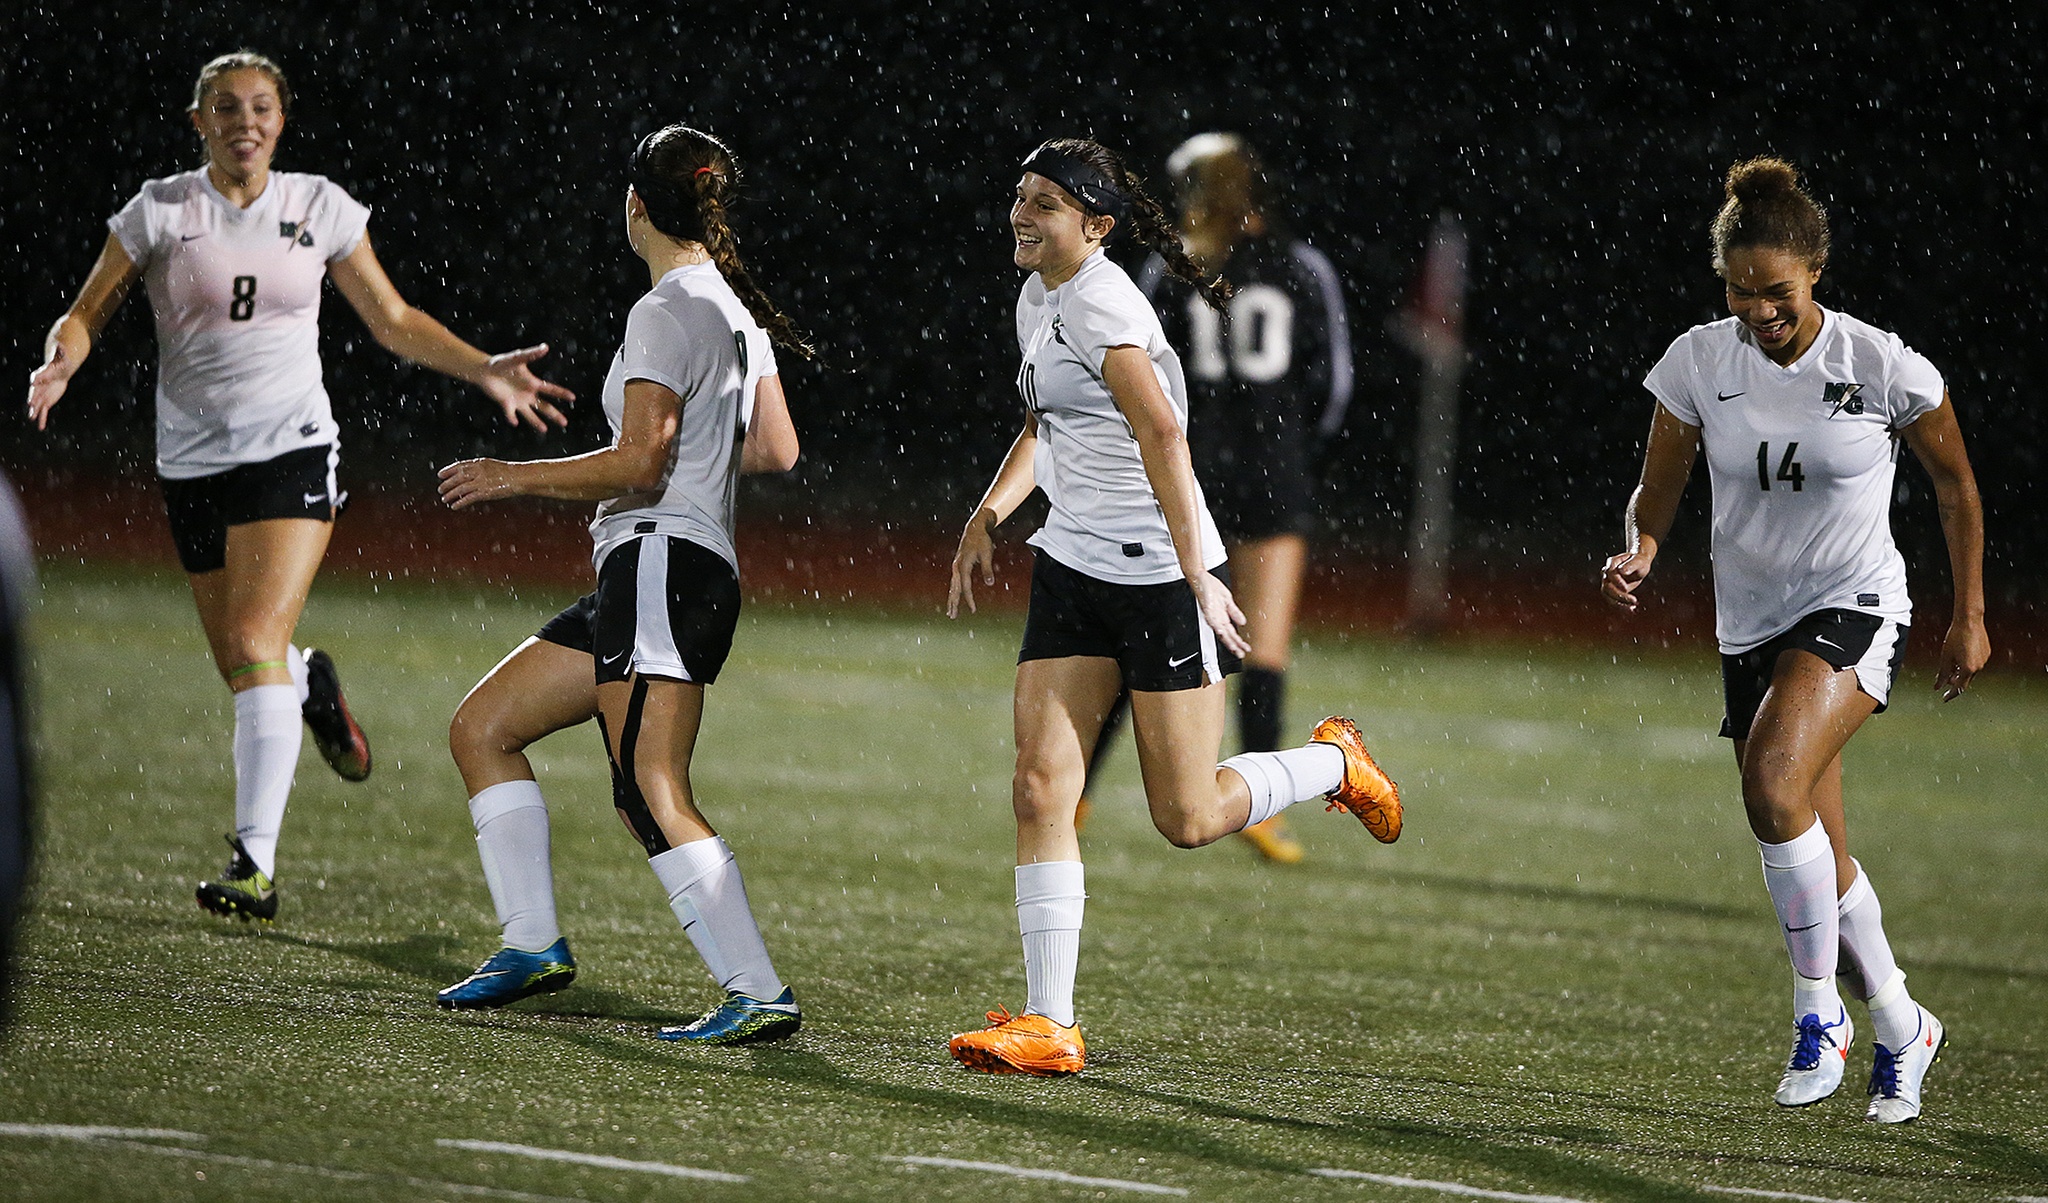 Marysville-Getchell’s Hayli Huhta (center) smiles after scoring to go up 2-0 on Snohomish in the first half of a game at Marysville-Getchell High School on Tuesday, Oct. 4. (Ian Terry / The Herald)